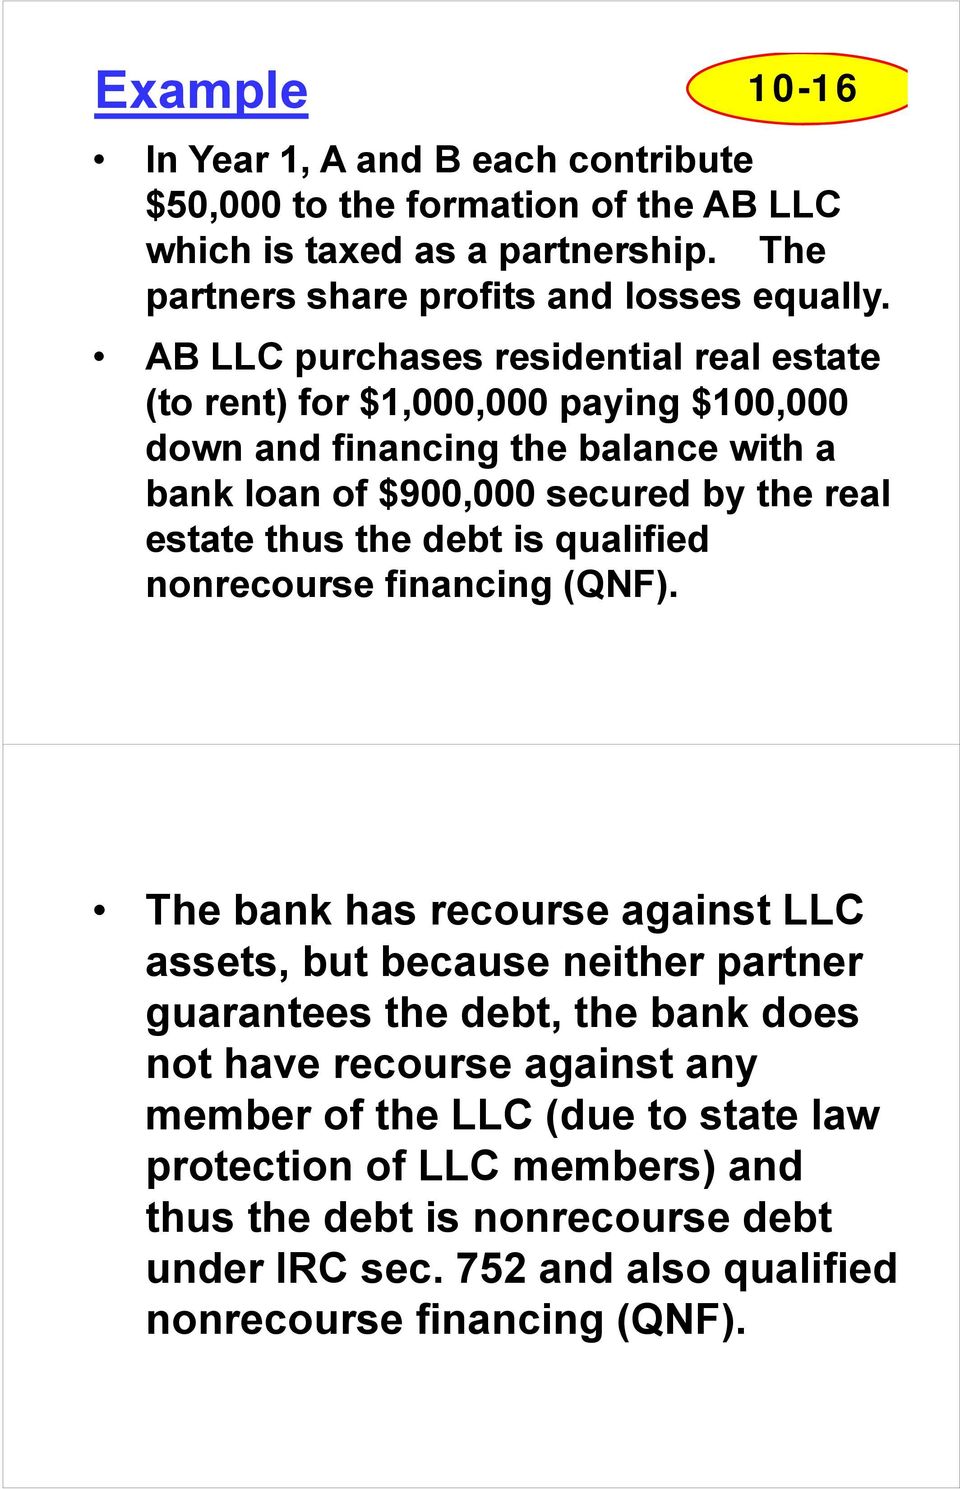 the debt is qualified nonrecourse financing (QNF).